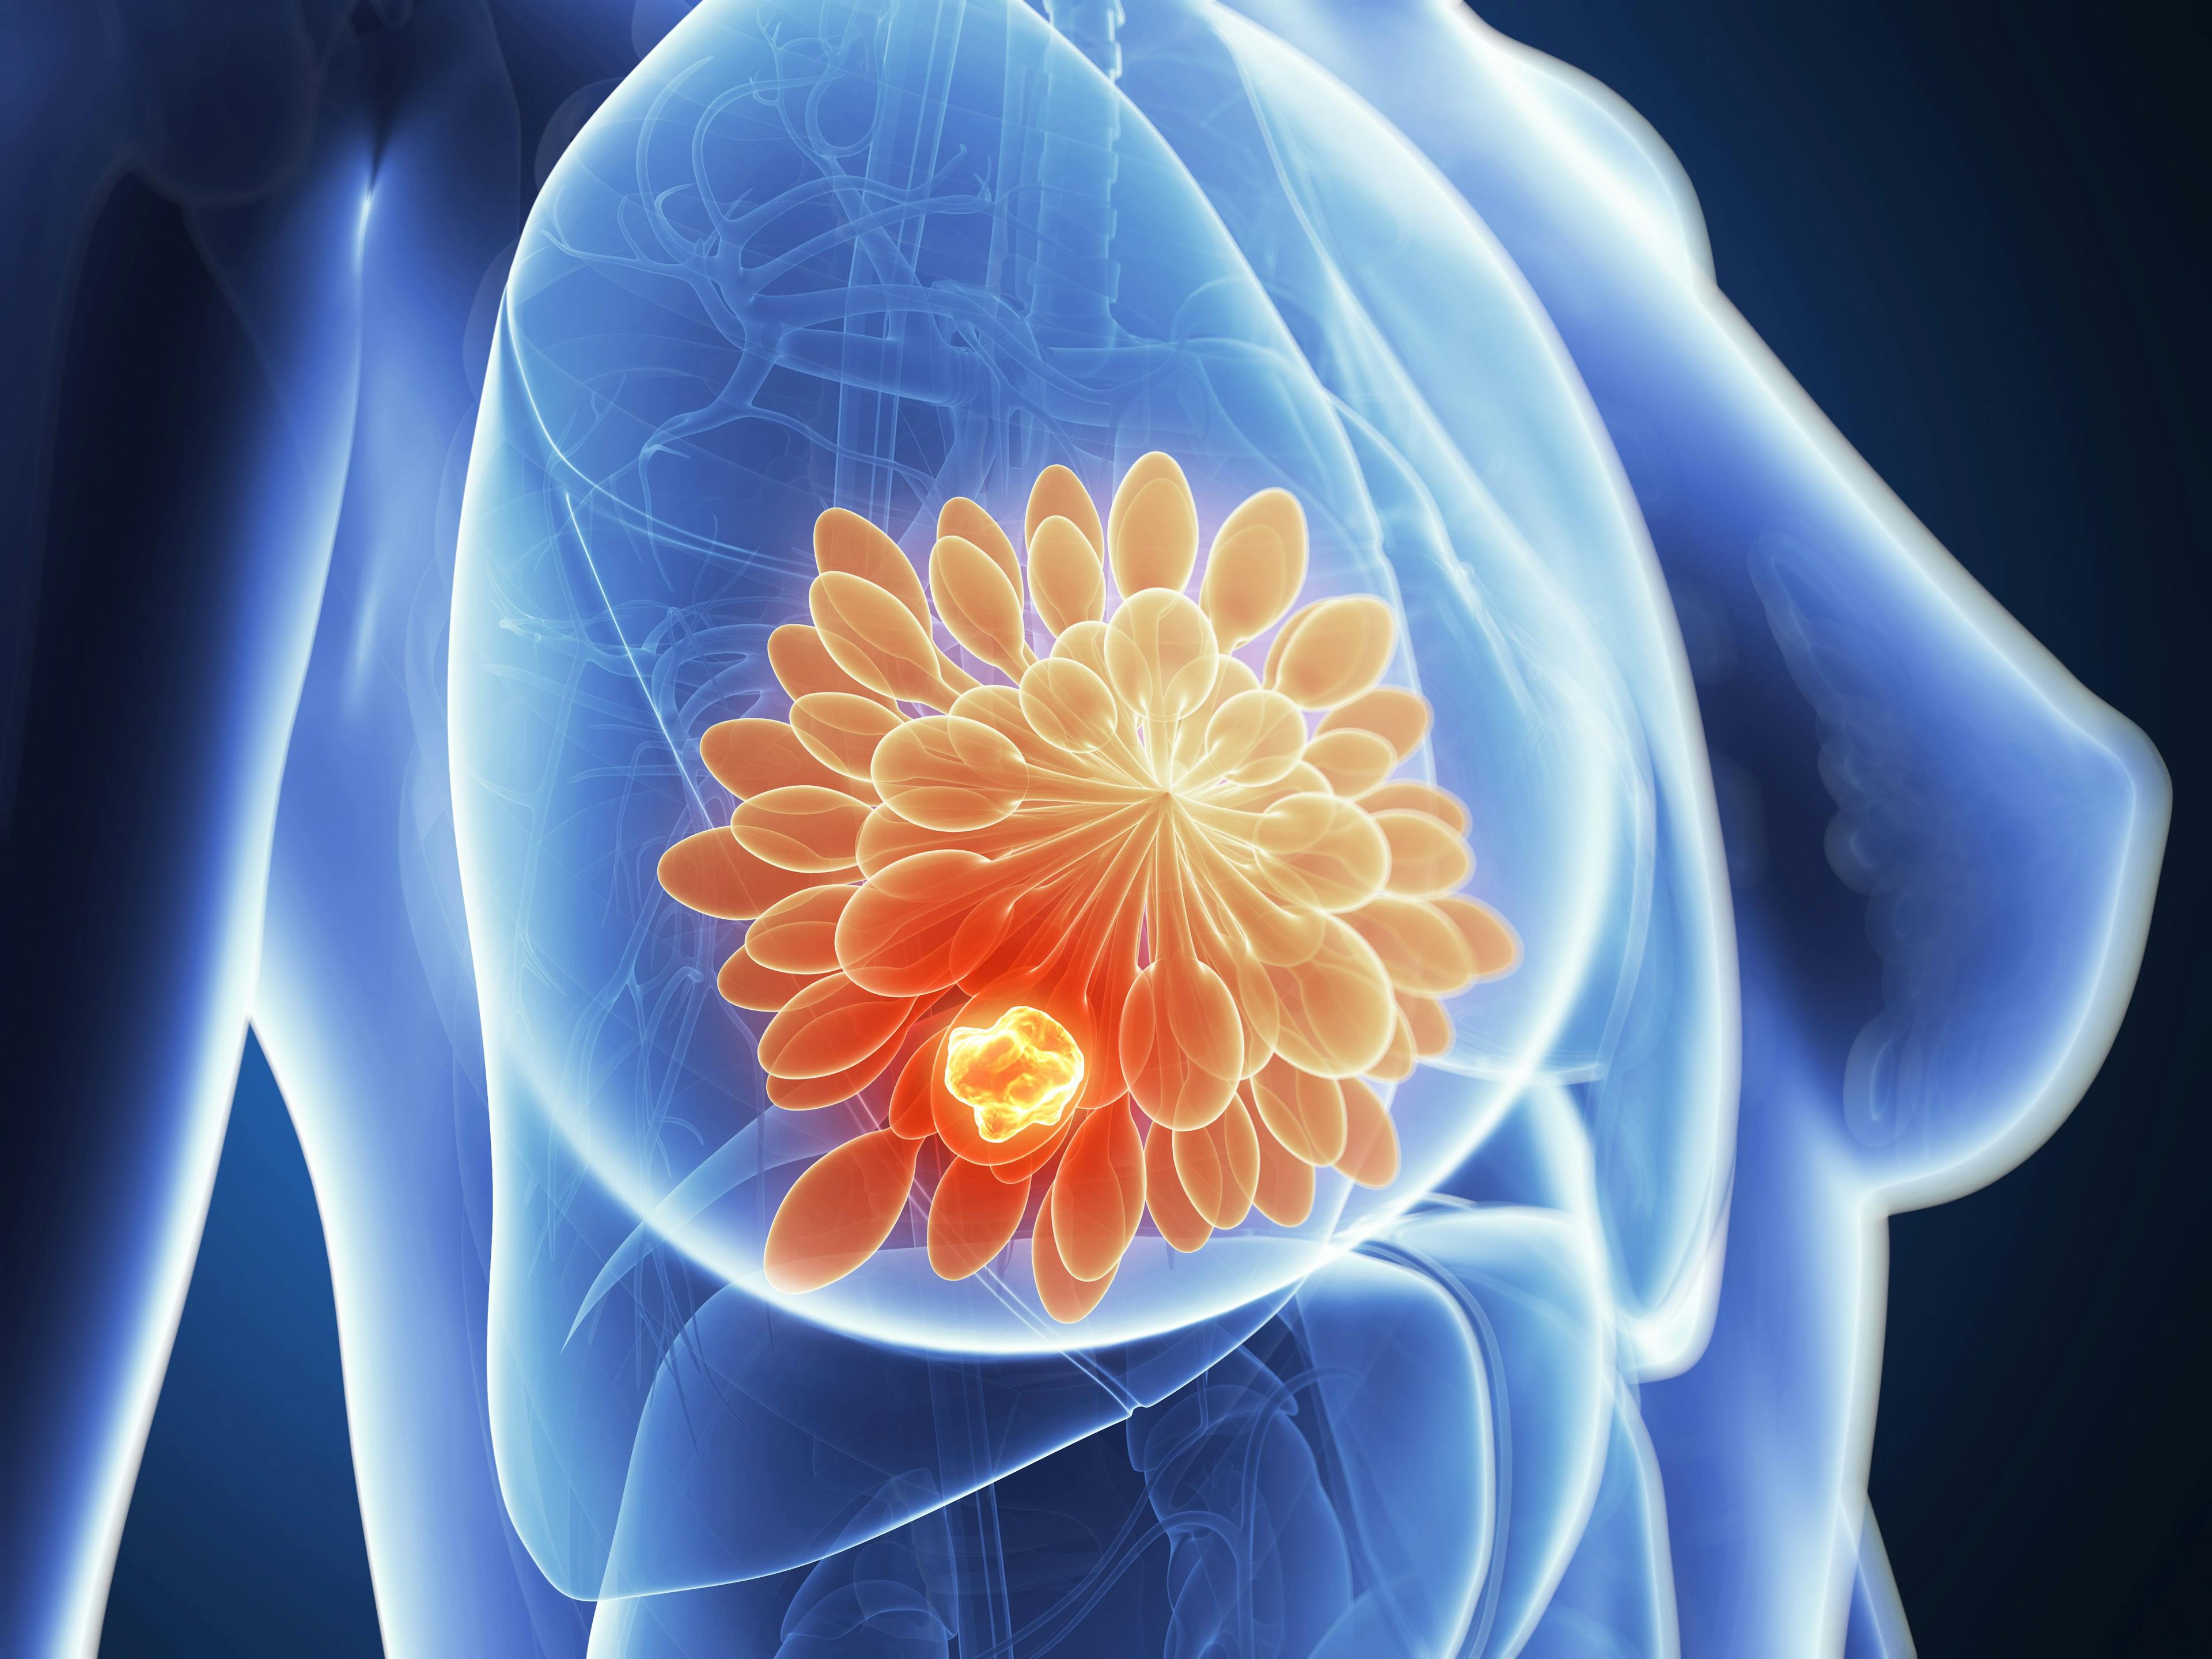 The study enrolled newly diagnosed patients who were randomly assigned 1:1 to neoadjuvant chemotherapy plus nivolumab 360 mg once every 3 weeks/nivolumab 240 mg once every 2 weeks (arm A) or neoadjuvant chemotherapy plus placebo (arm B). Image Credit: © SciePro - stock.adobe.com